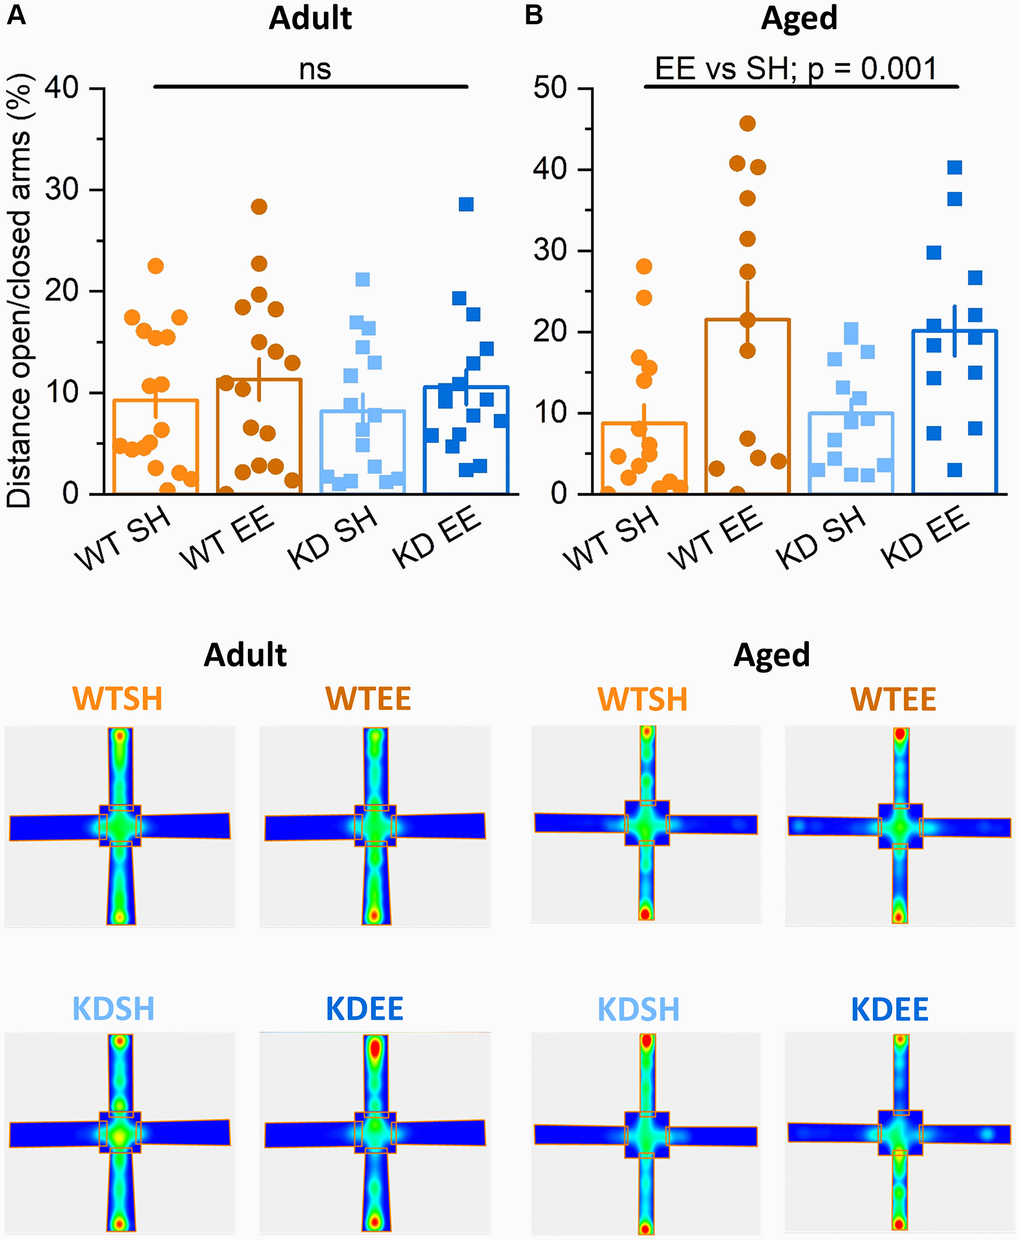 Enrichment reduces anxiety-like behaviour in aged mice. (A) In the Elevated Plus Maze task in the Adult groups the distance travelled in the open area vs. that in the closed area (Distance travelled in the open arms/distance travelled in the closed arms ×100 expressed in %.) was not different between Genotype nor Housing condition (Genotype effect: F(1,56) = 0.12, p = 0.740; Housing effect: F(1,56) = 3.87, p = 0.054; Interaction Genotype x Housing: F(1,56) = 0.81, p = 0.370). (B) In the Aged groups the distance travelled in the open area vs. that in the closed area was greater in the enriched groups of both genotypes, indicating that enrichment effectively reduced anxiety-like behaviour (Housing: F(1,49) = 13.81, p = 0.001). Heatmaps below the graphs depict the arm occupancy for the mice of each group, with the horizontal arms being the open arms in all conditions. Individual data points are presented for each animal, with the bar graph representing the mean ± SEM of the data.